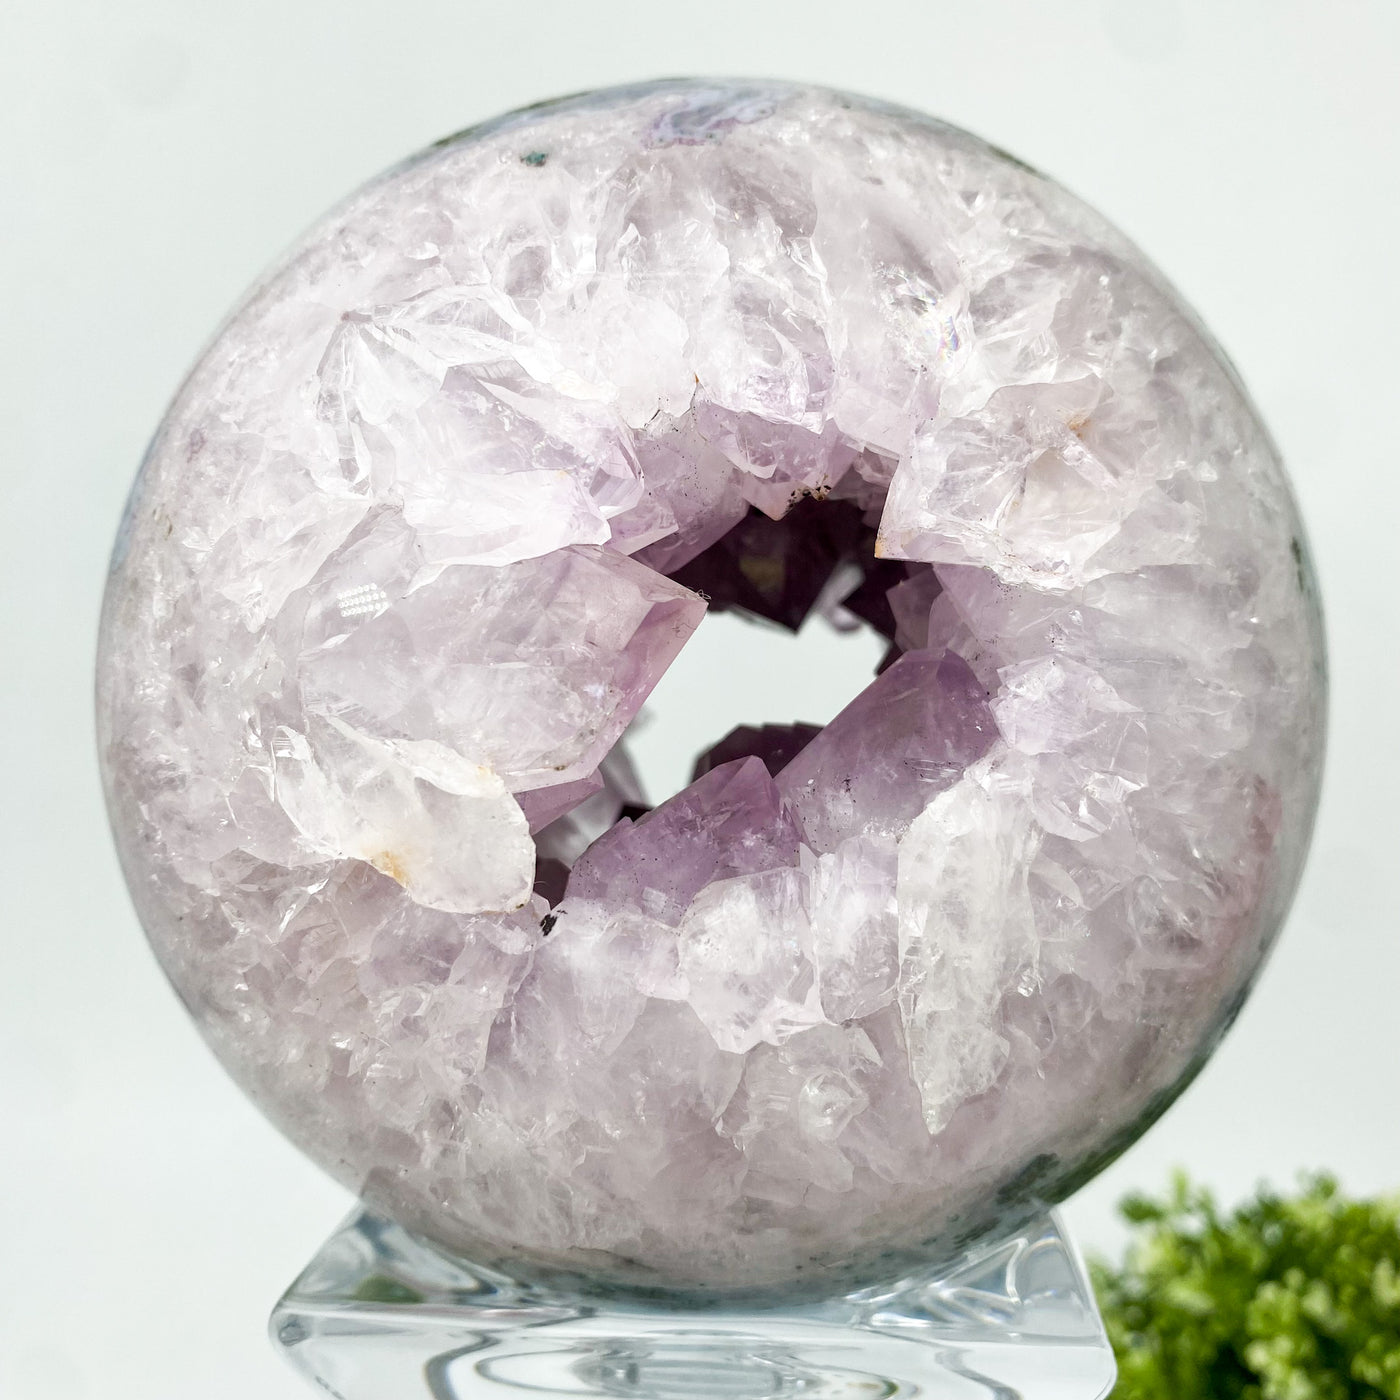 Amethyst sphere with Agate inclusions ✨